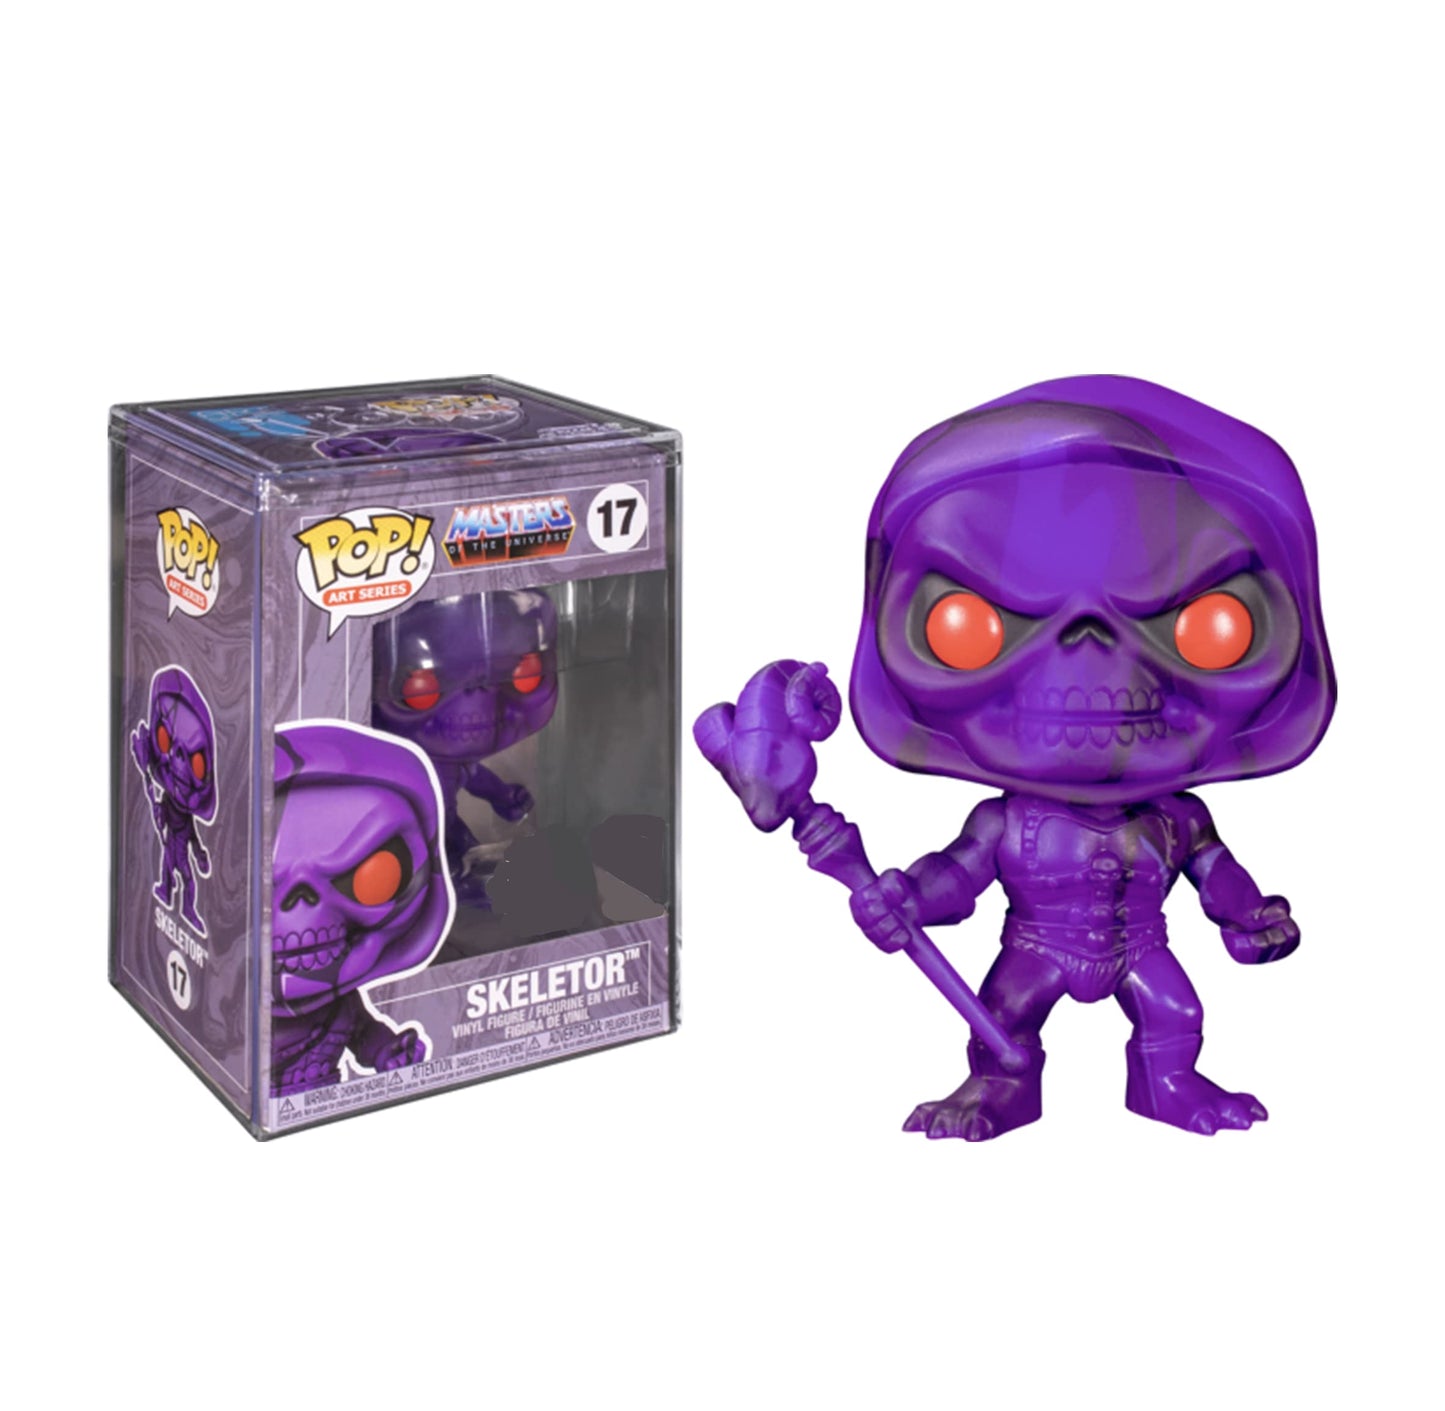 Funko POP! Television Masters of the Universe Skeletor (Art Series) #17